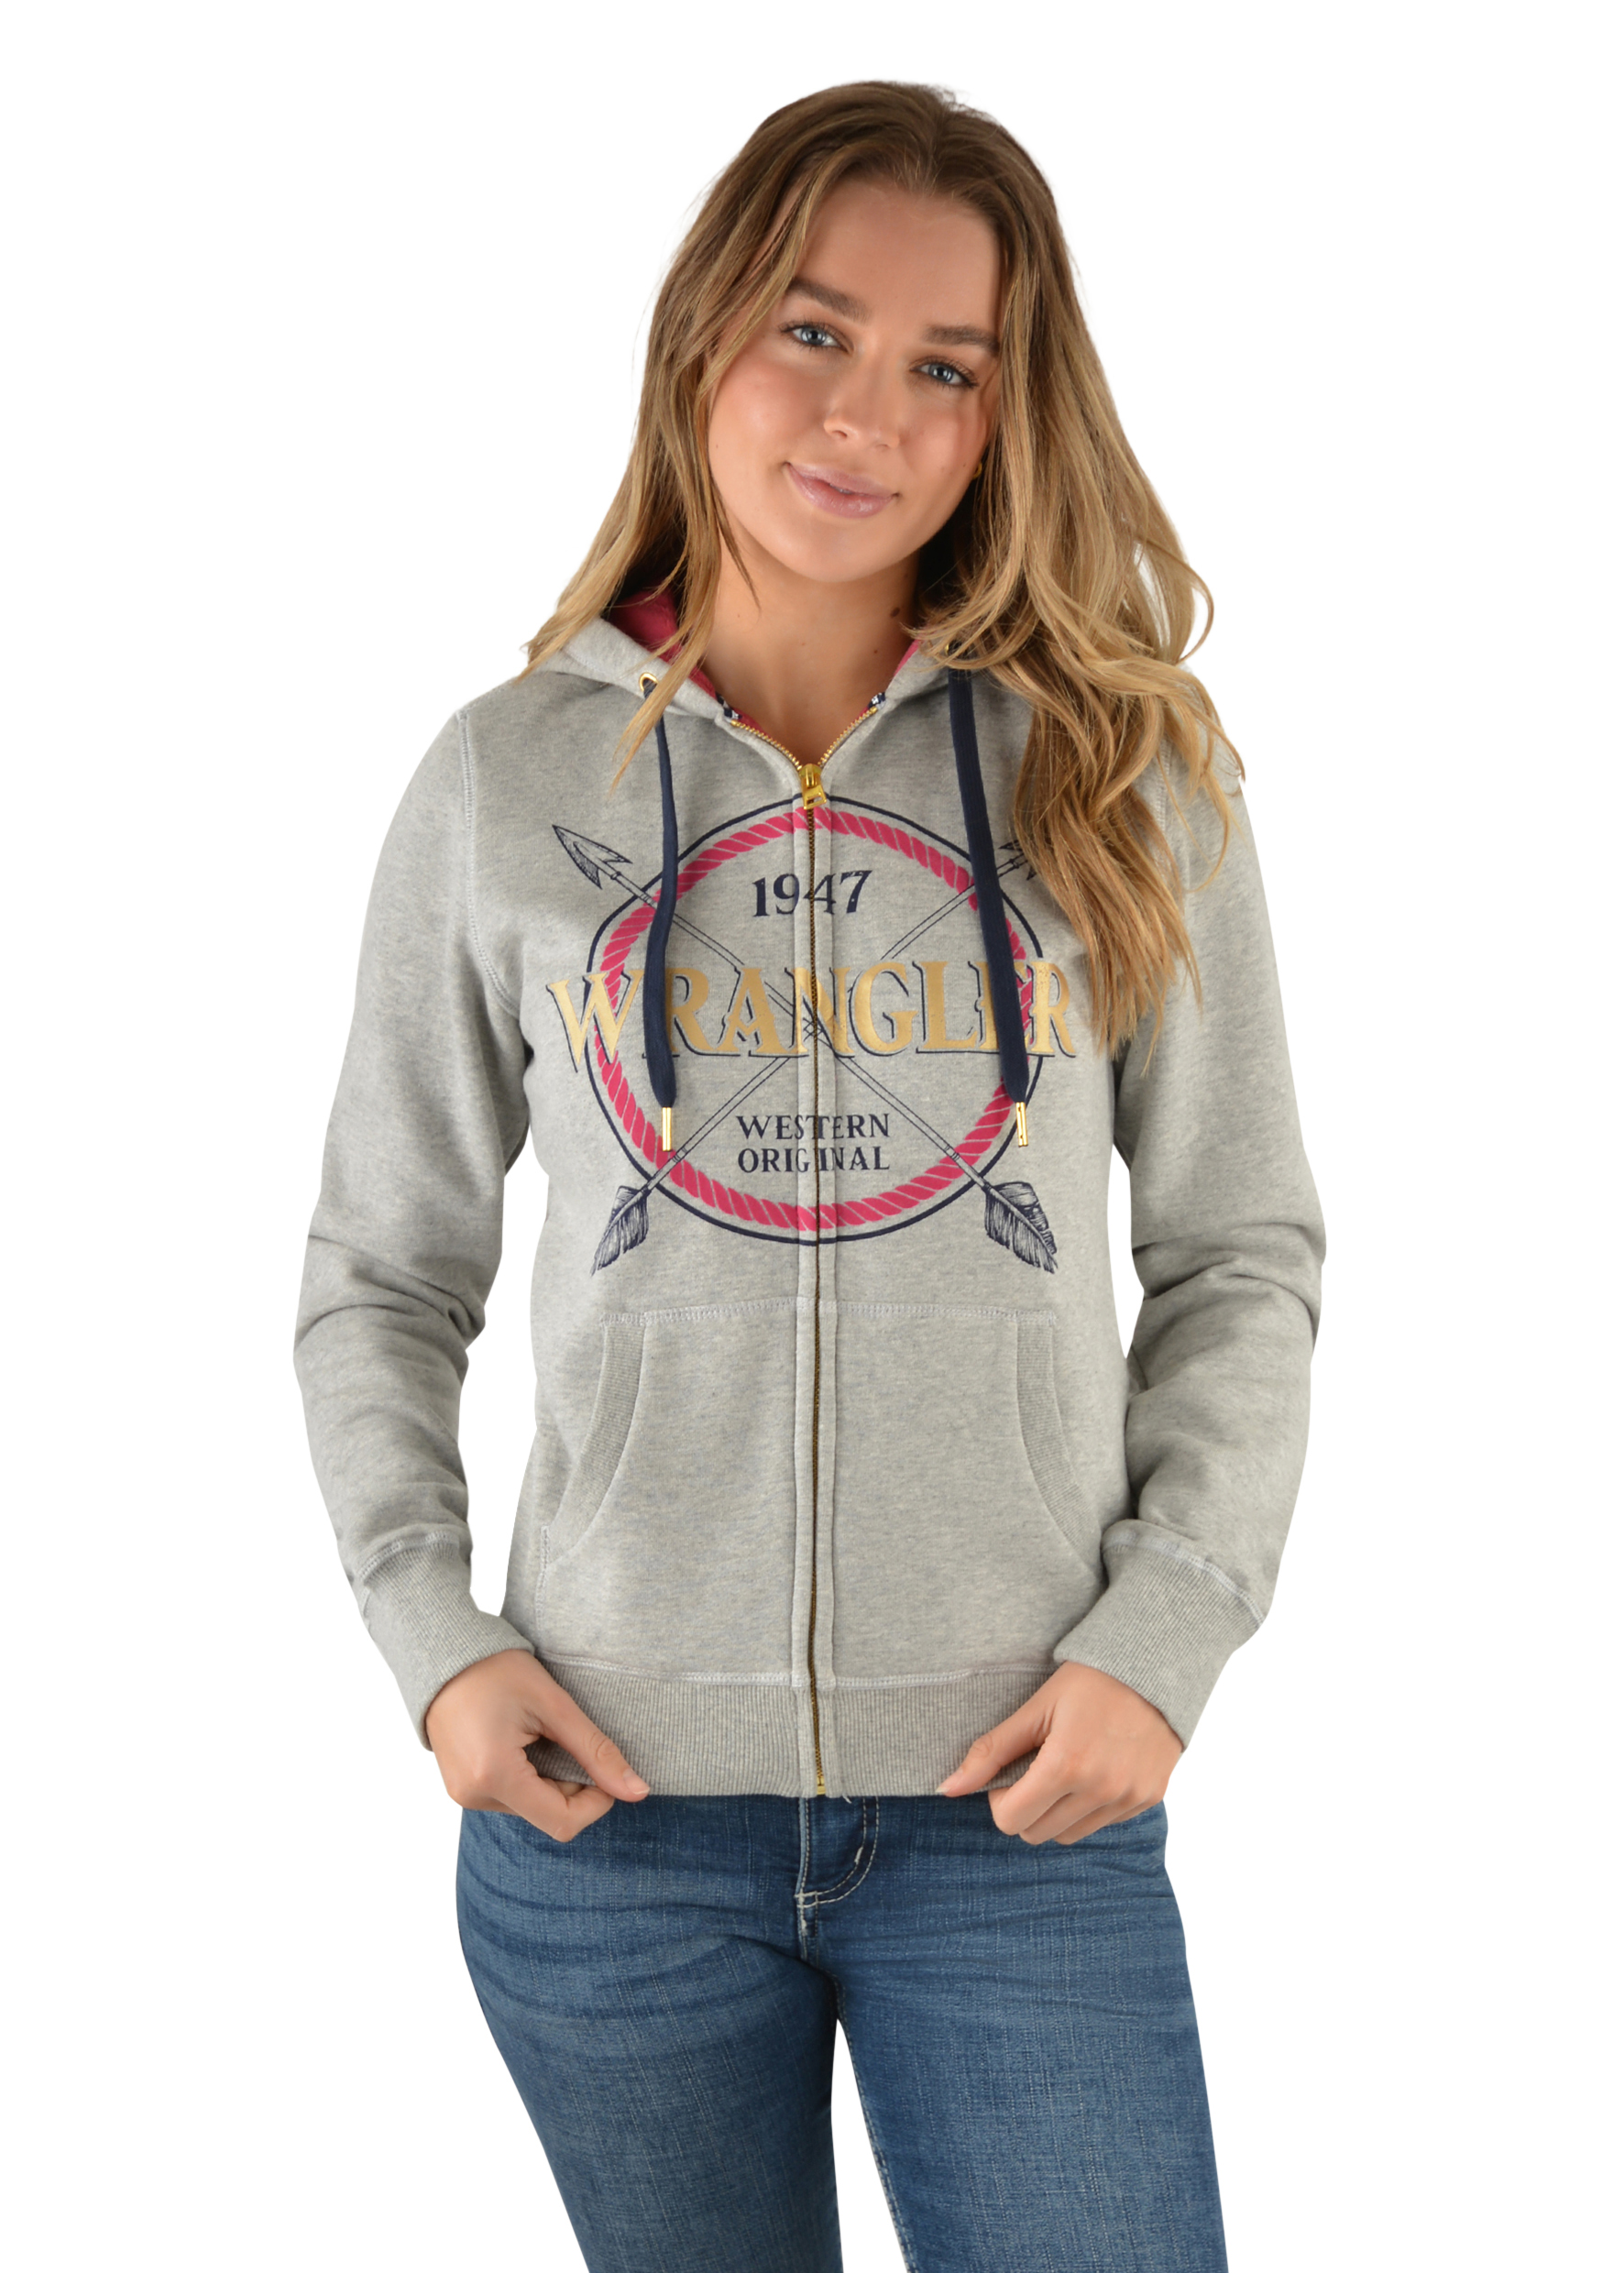 Wrangler Women's Victoria Zip Up Hoodie - Donohues, City & Country Gear